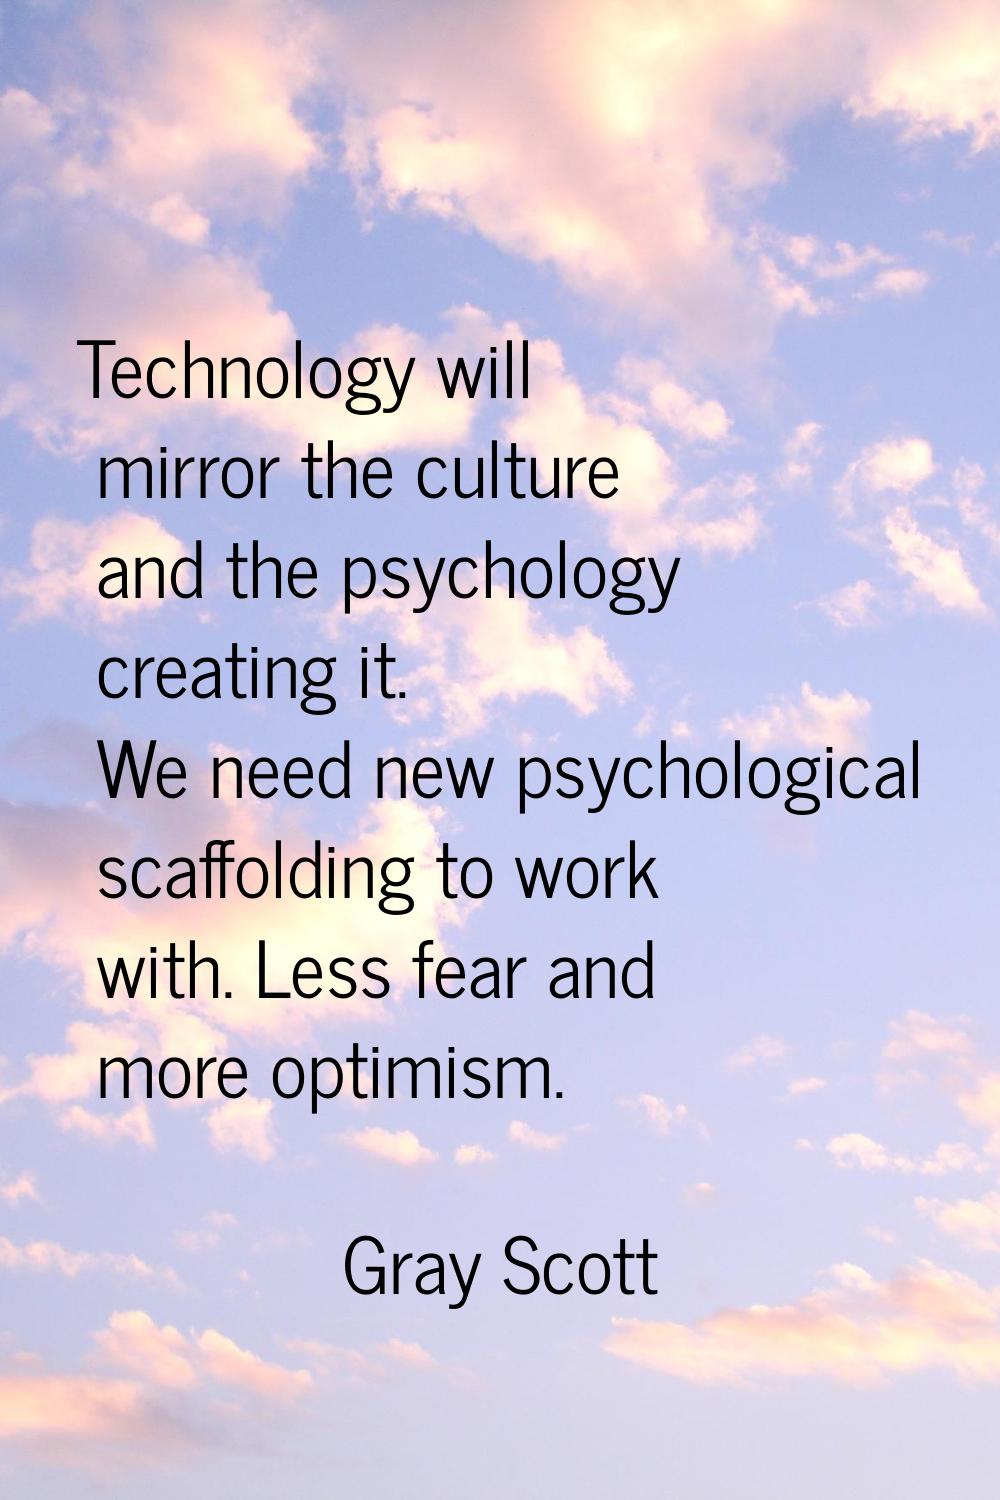 Technology will mirror the culture and the psychology creating it. We need new psychological scaffo